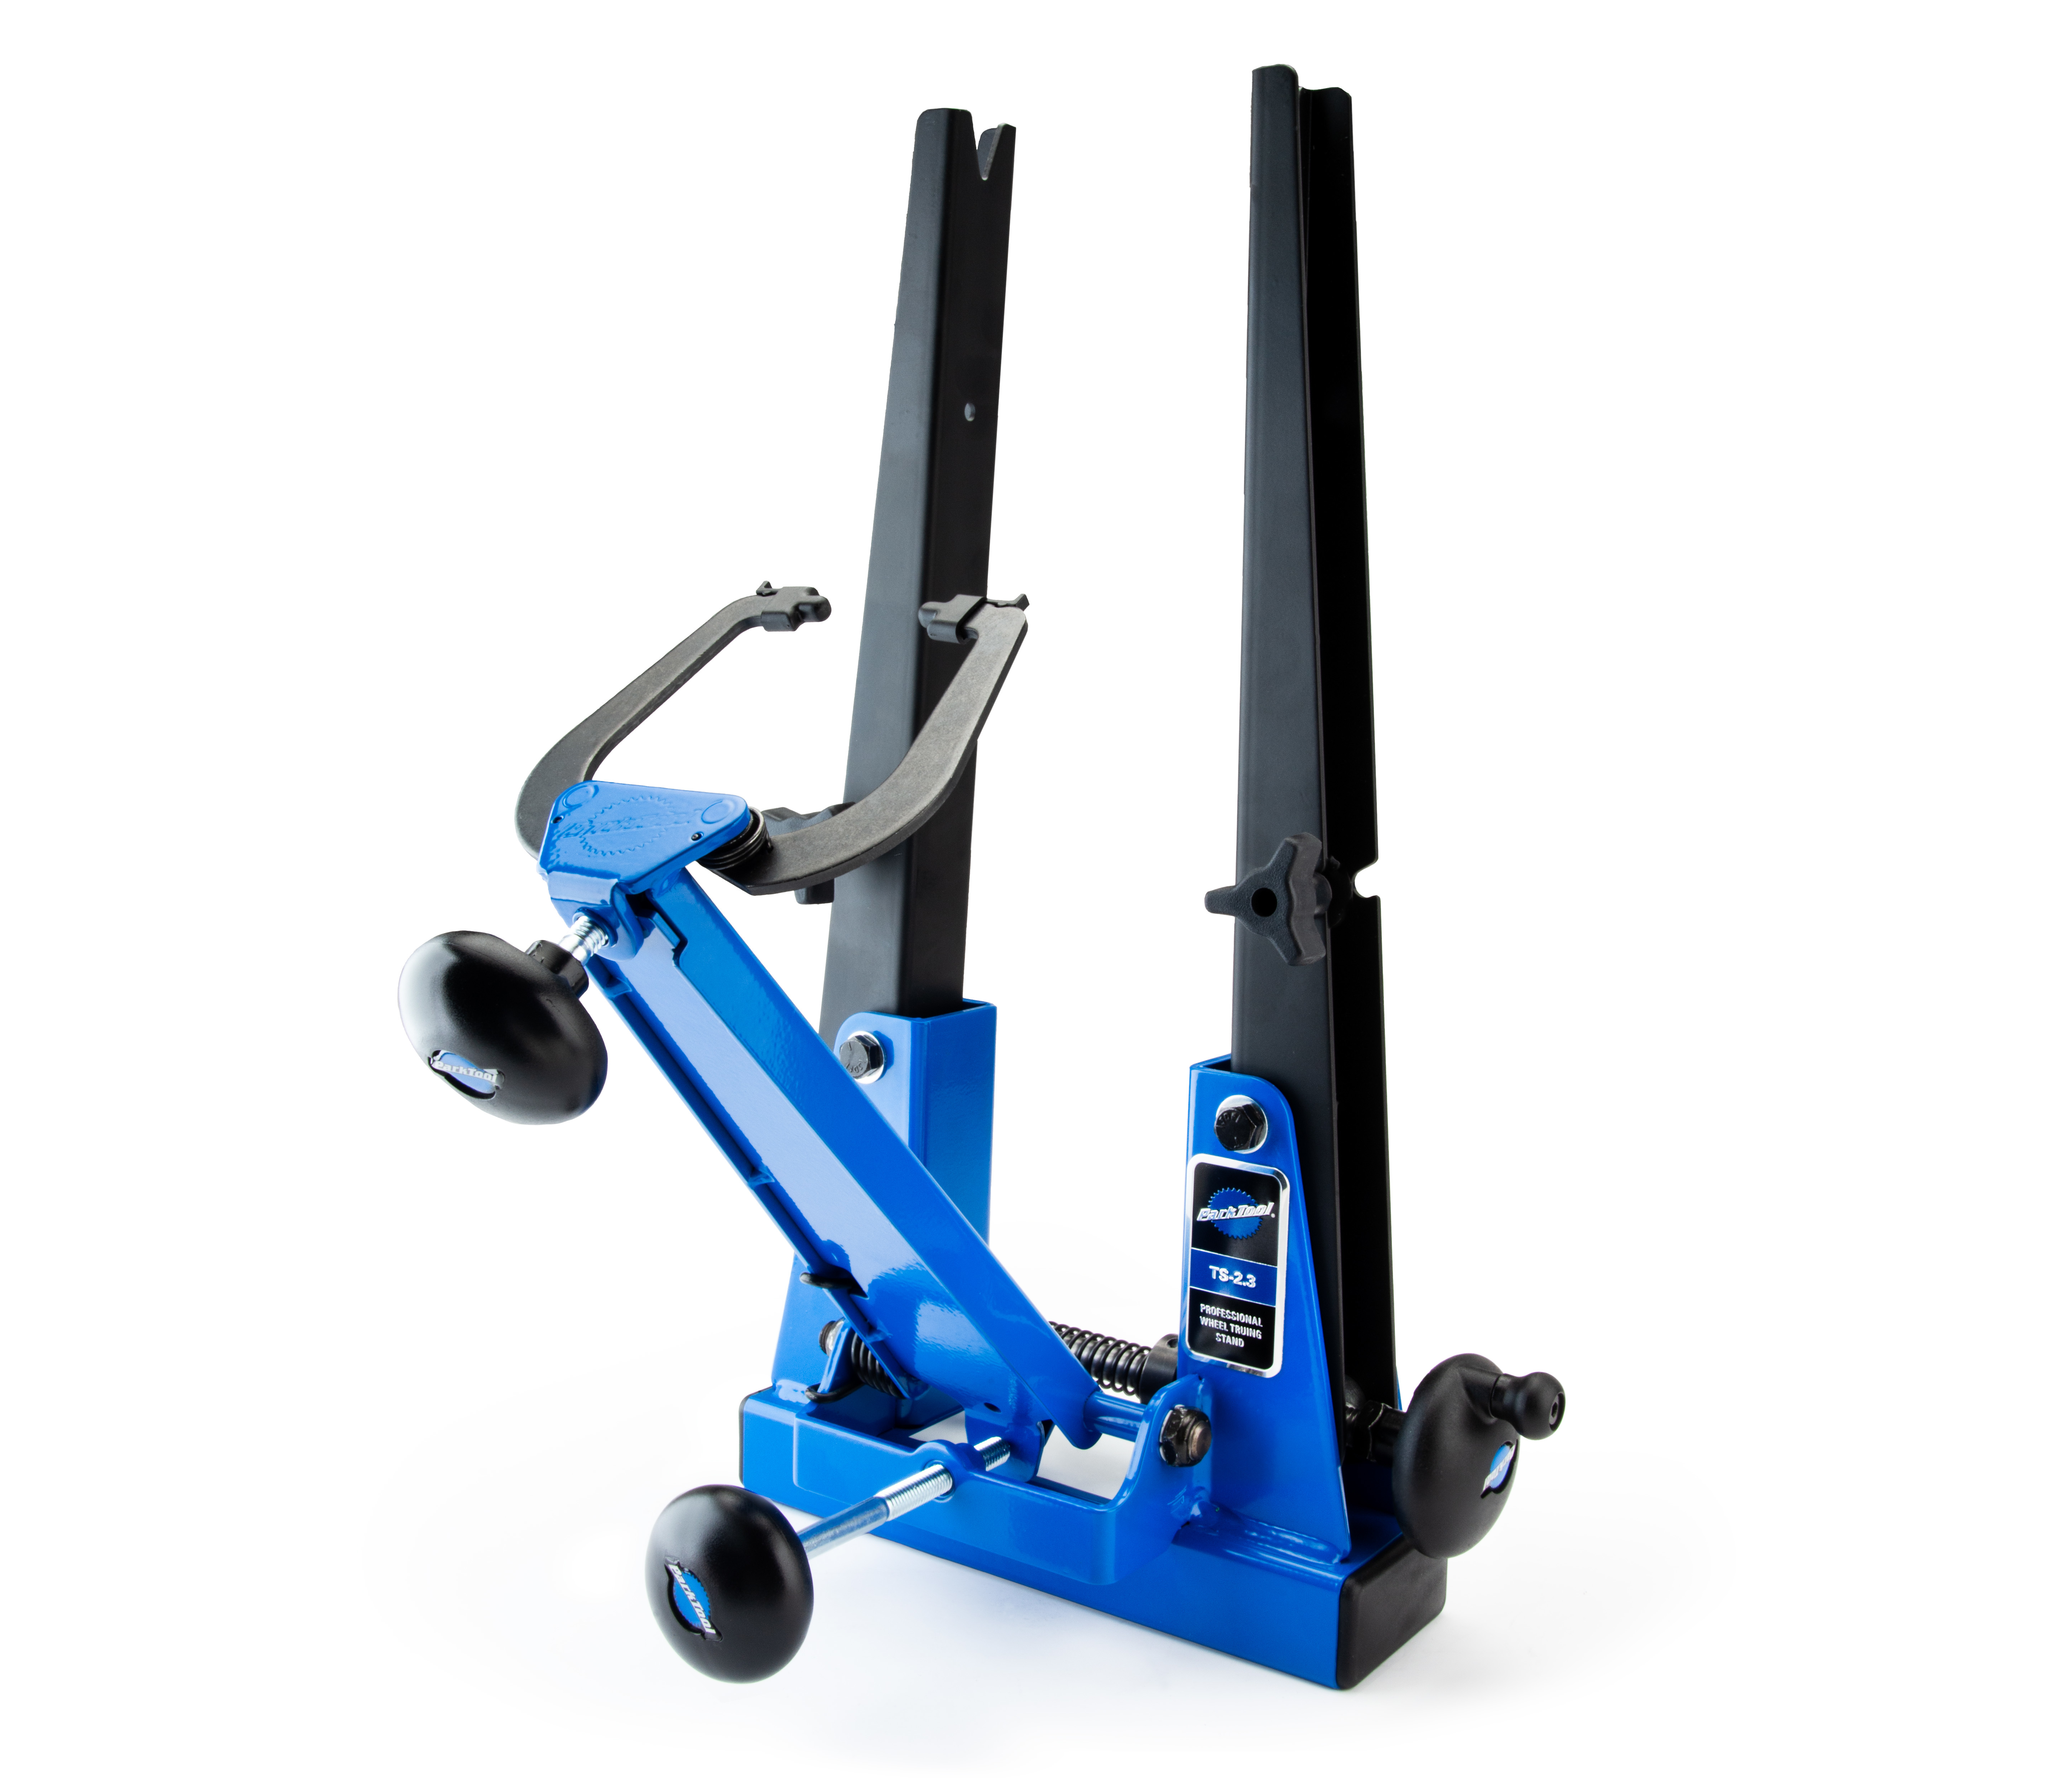 The Park Tool TS-2.3 Professional Wheel Truing Stand